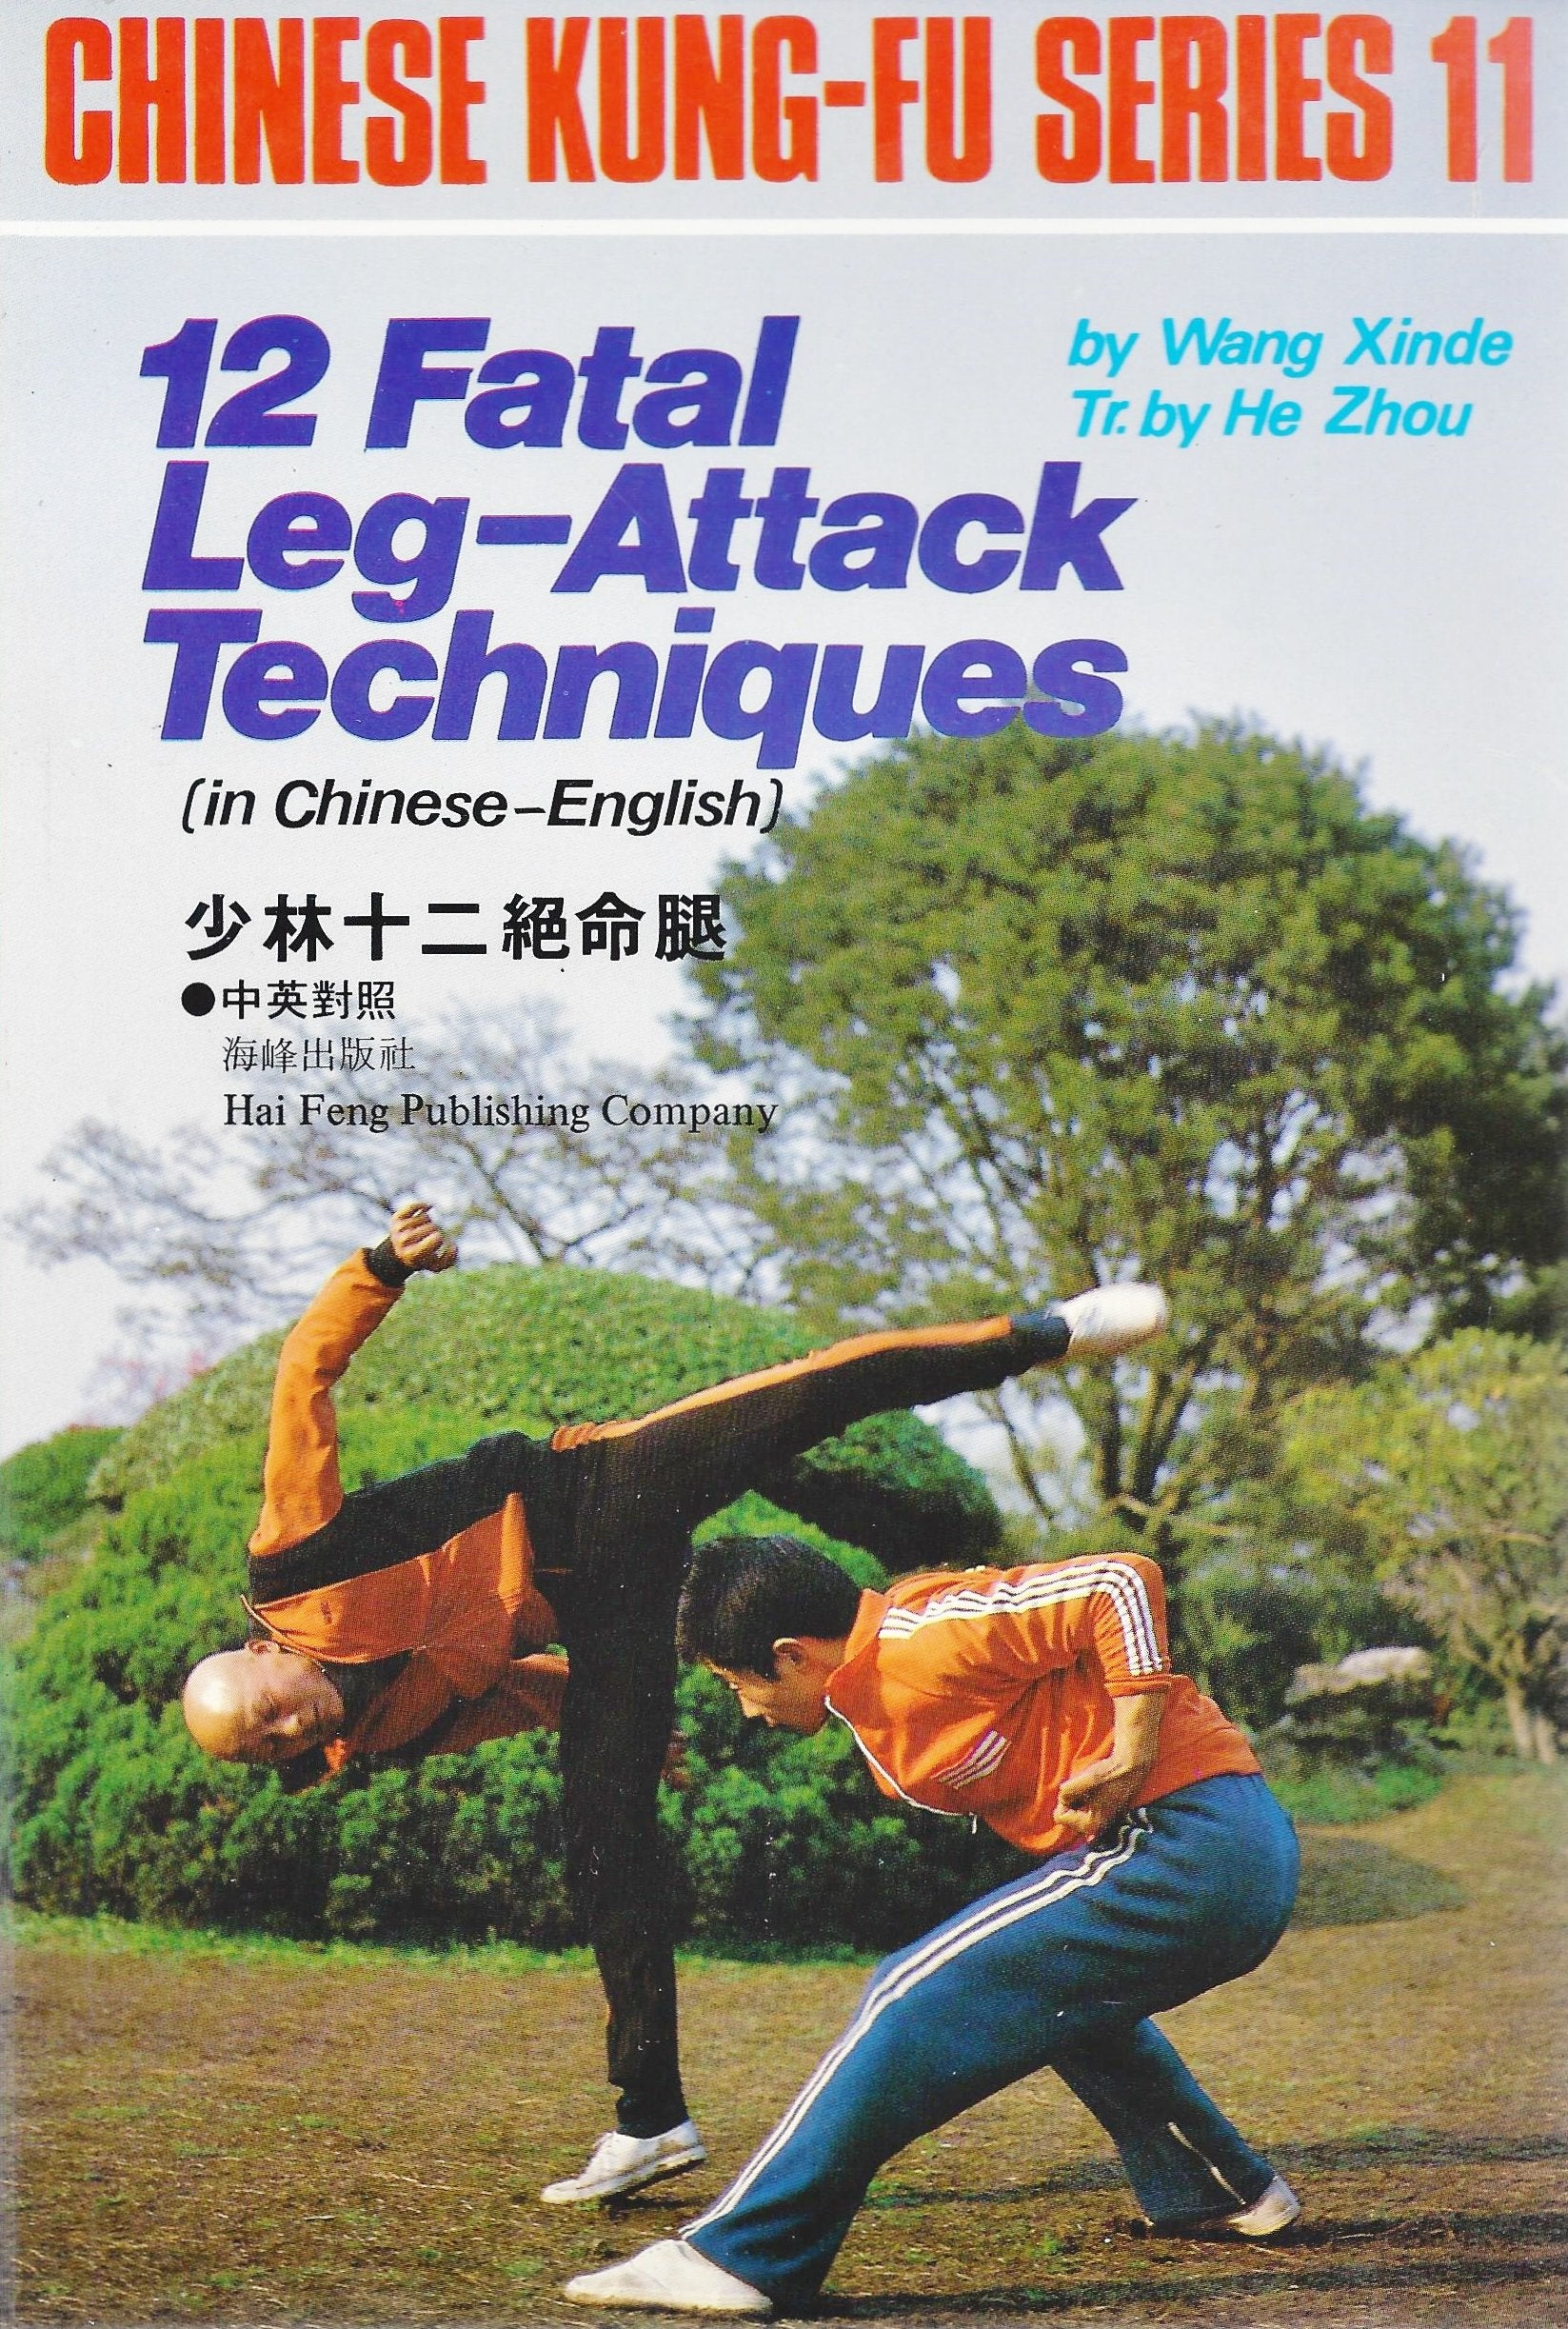 12 Fatal Leg-Attack Techniques - Chinese Kung-fu Series 11